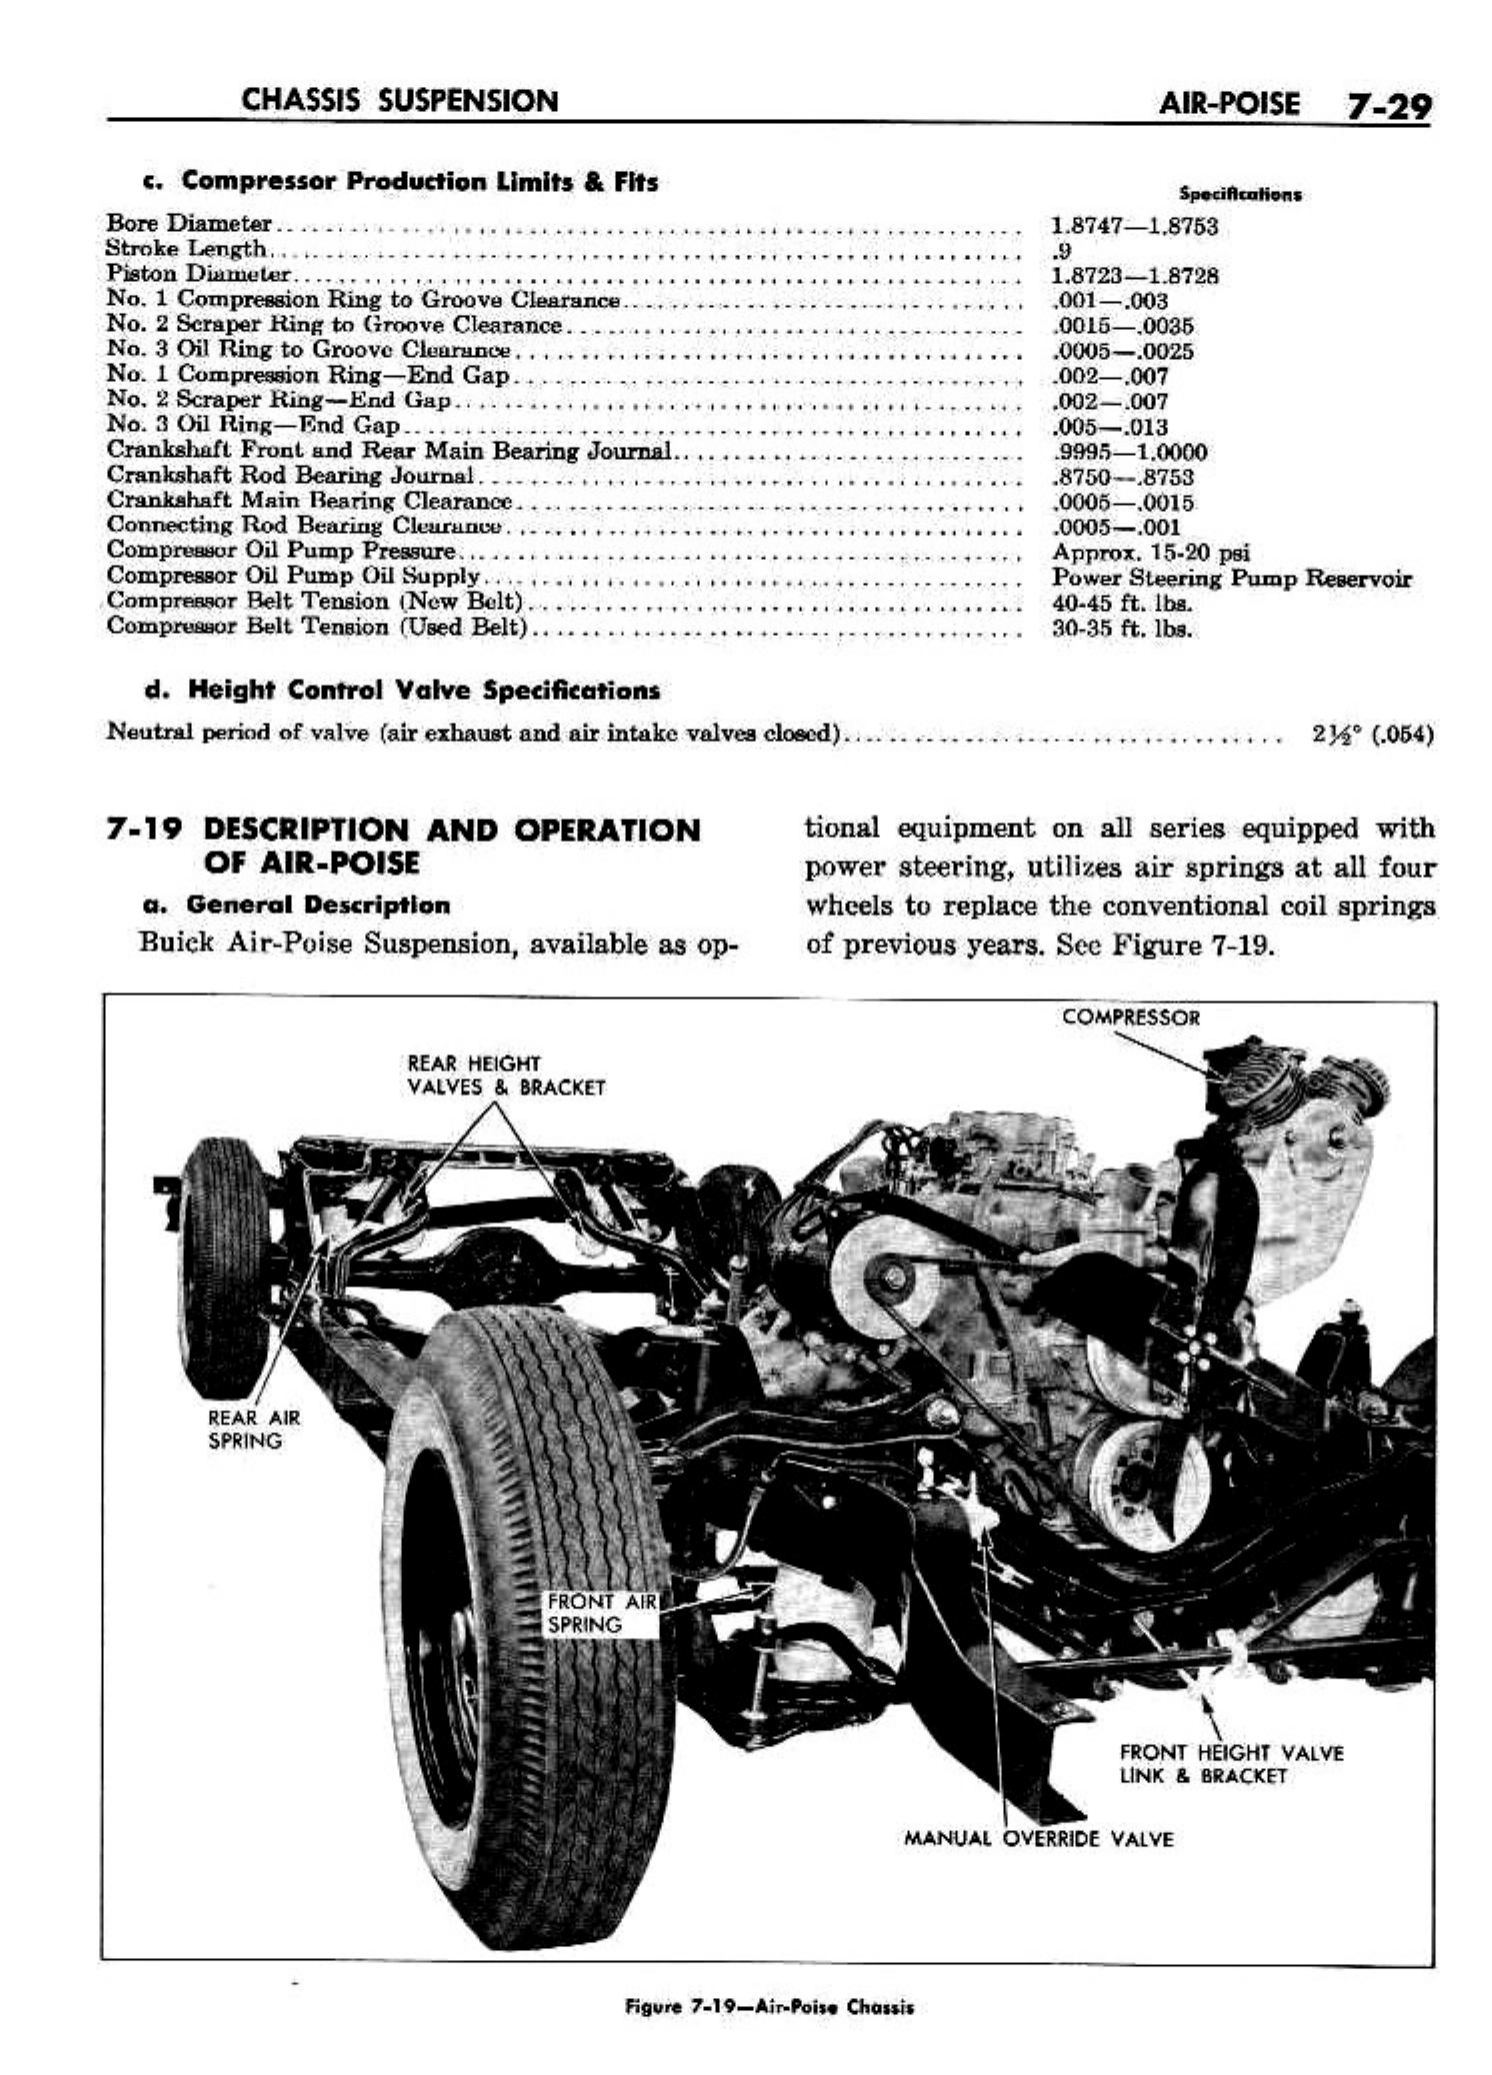 n_08 1958 Buick Shop Manual - Chassis Suspension_29.jpg